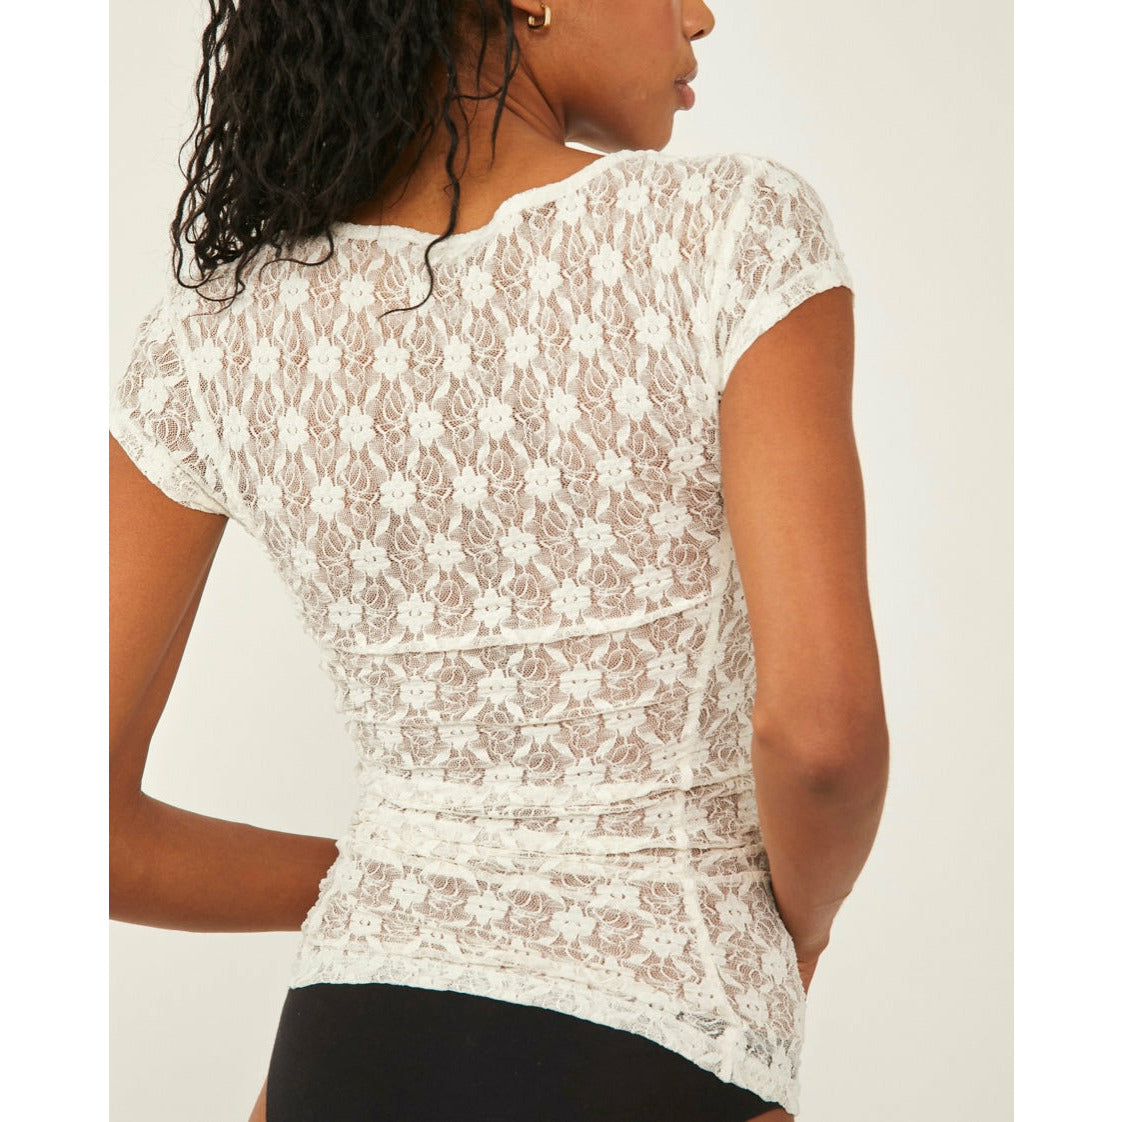 FREE PEOPLE Keep it simple lace t-shirt